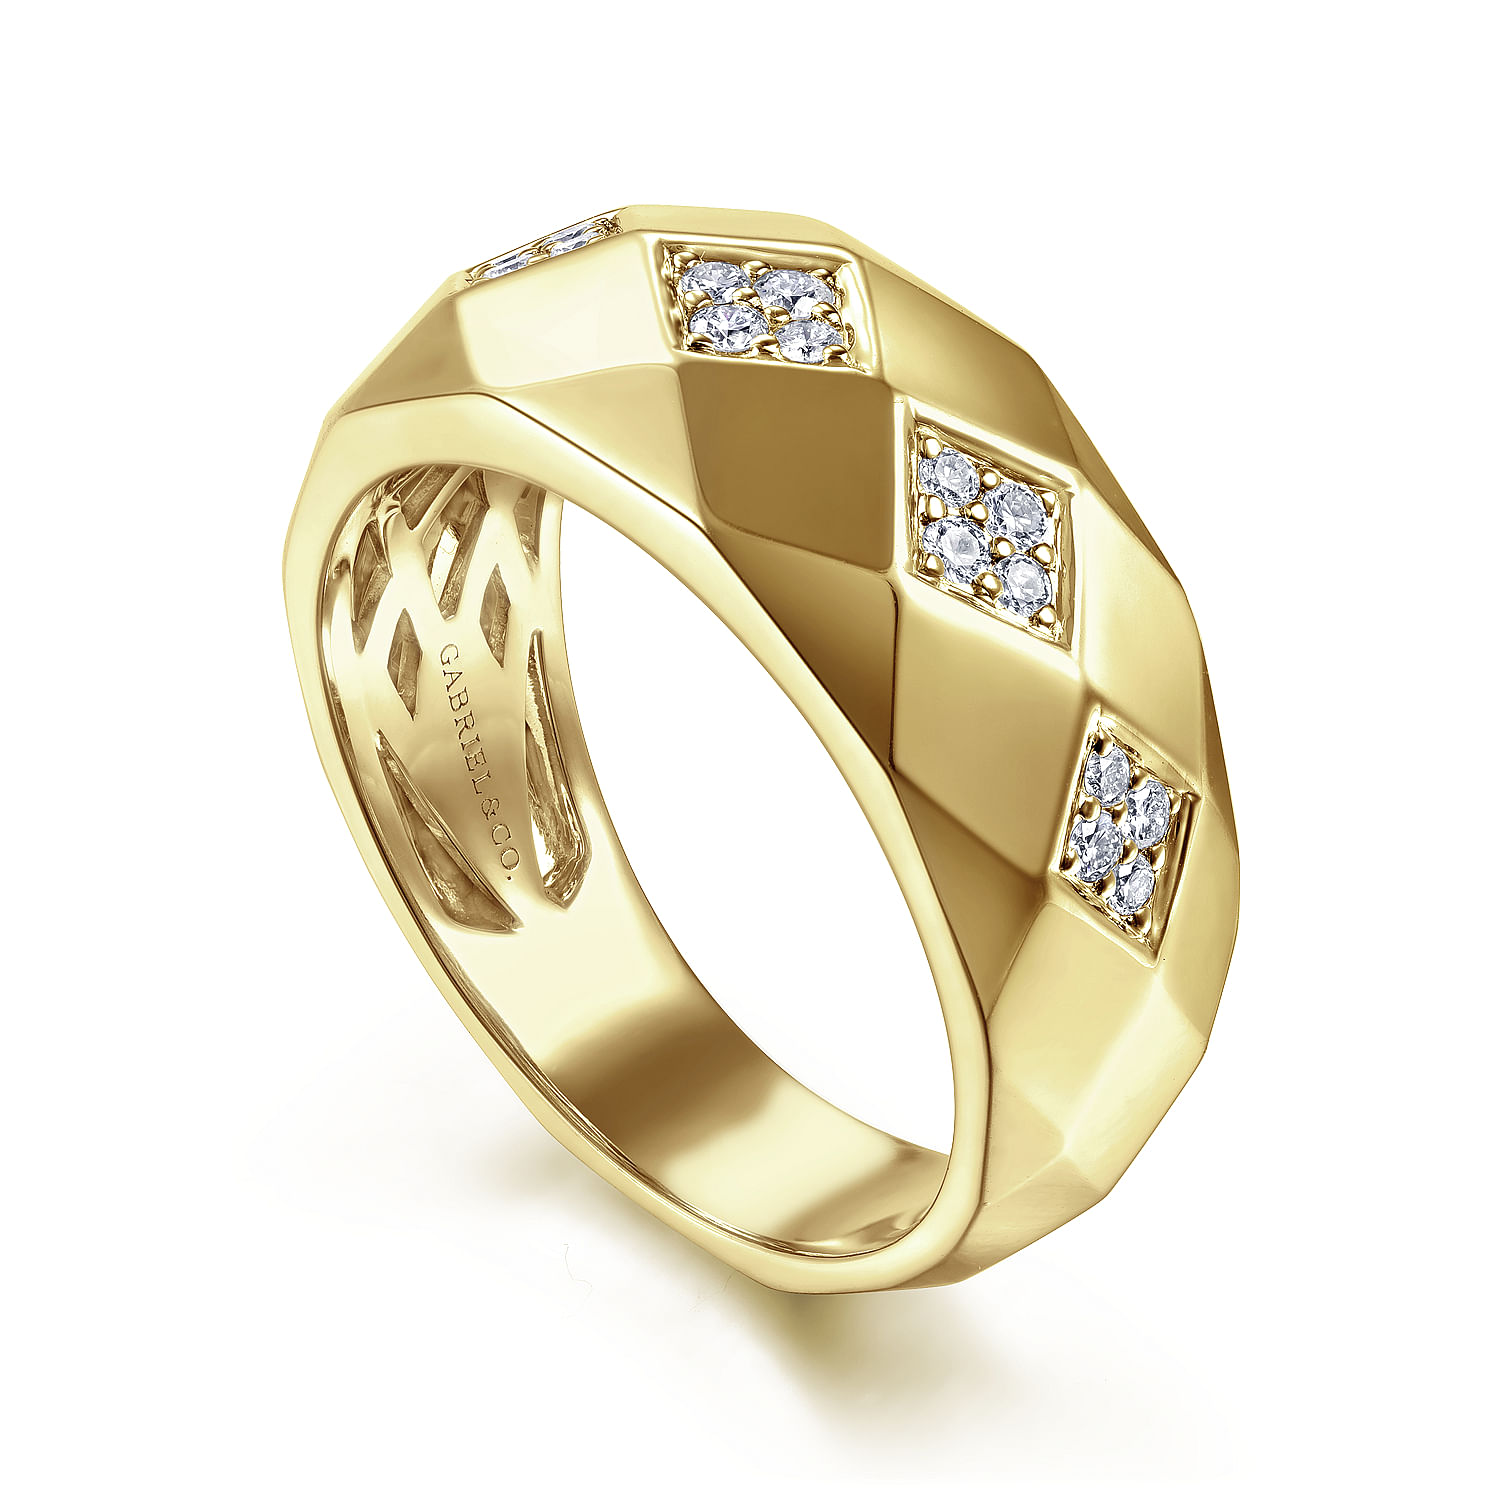 14K Yellow Gold Faceted Diamond Ring in High Polished Finish